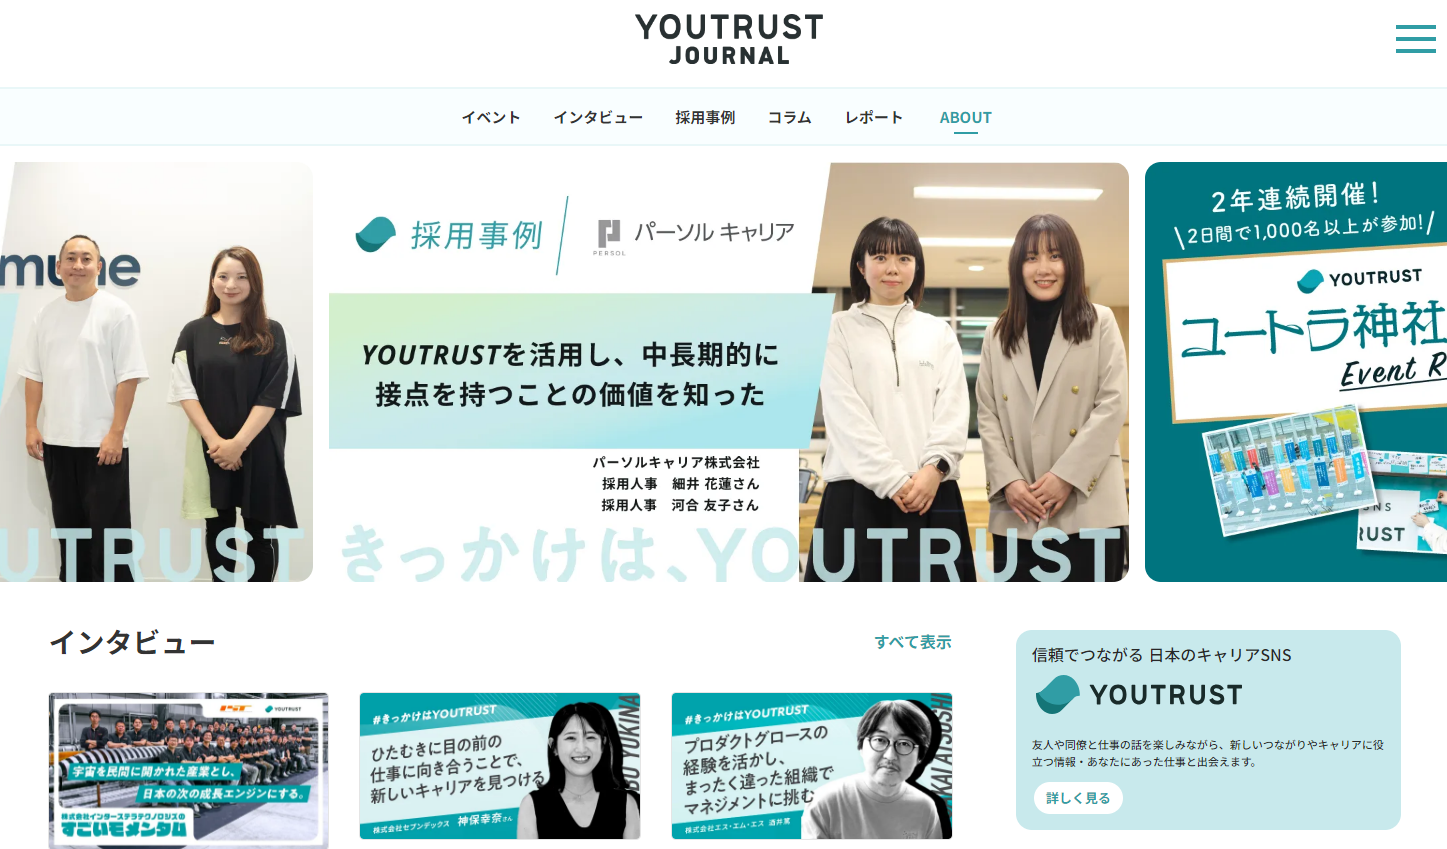 YOUTRUST JOURNAL